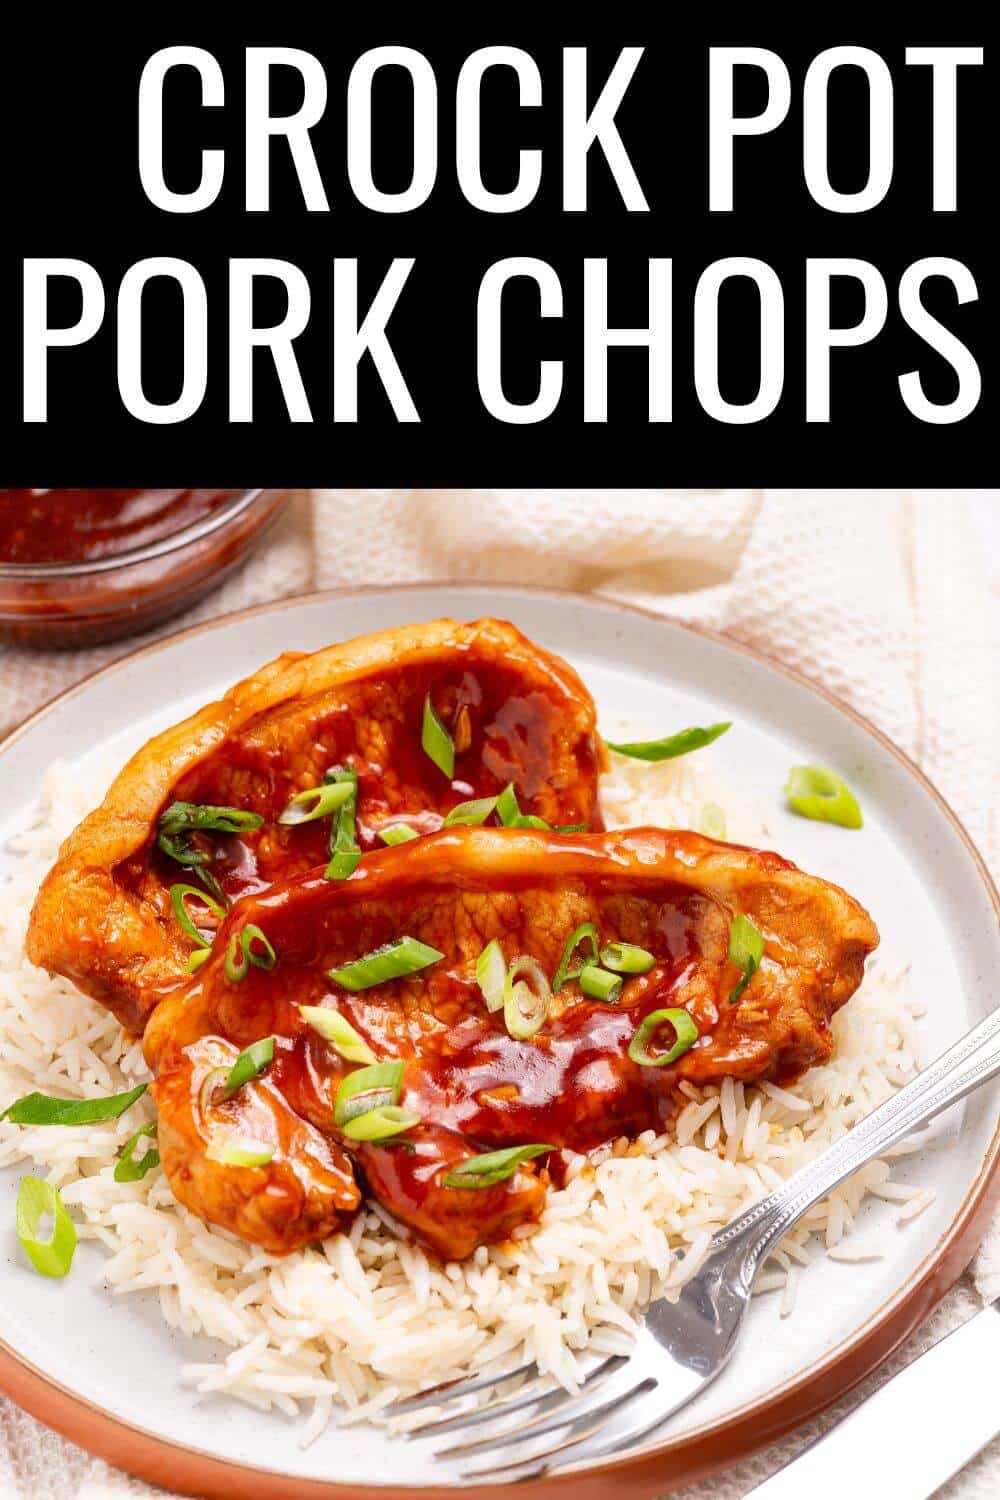 Crock pot pork chops on a plate with rice.